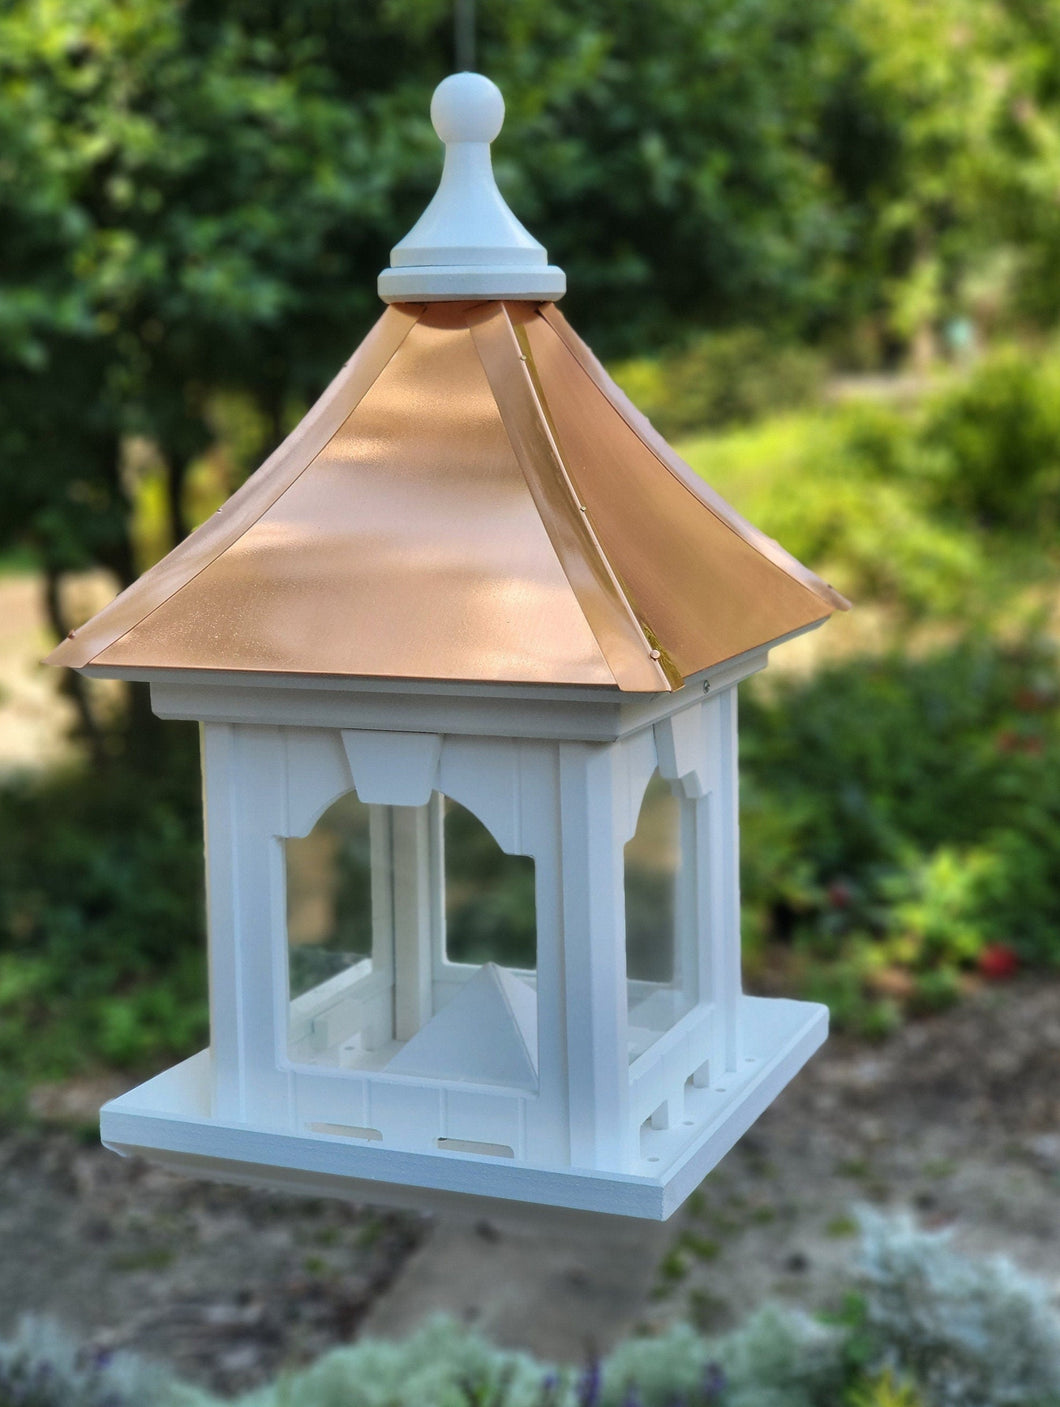 Hanging Bird Feeder, Copper Roof, Large Capacity Feed Tray, Square Design